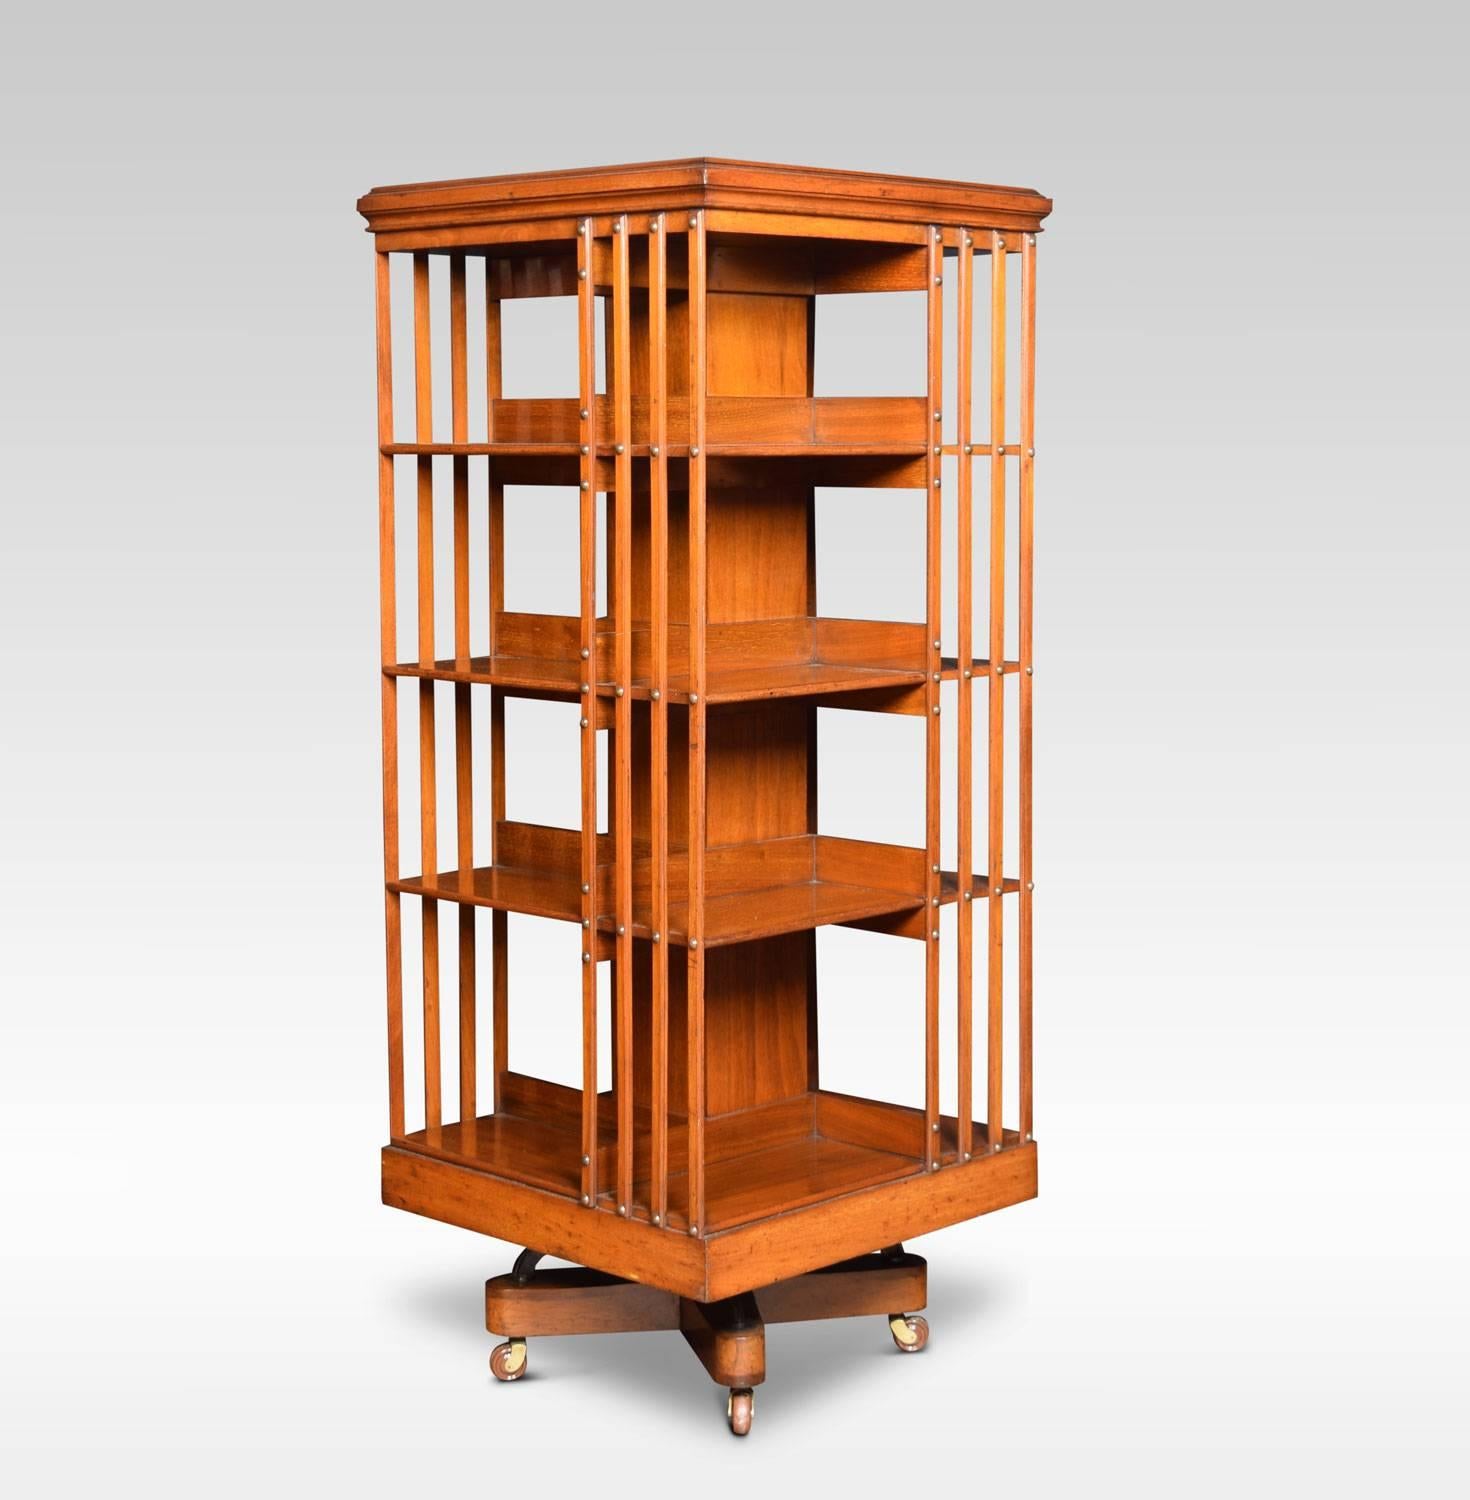 Large walnut revolving bookcase the square moulded top above four tiers with an arrangement of shelves raised up on metal cruciform base terminating in ceramic castors. This bookcase is almost certainly by Maple & Co

Dimensions:
Height 57